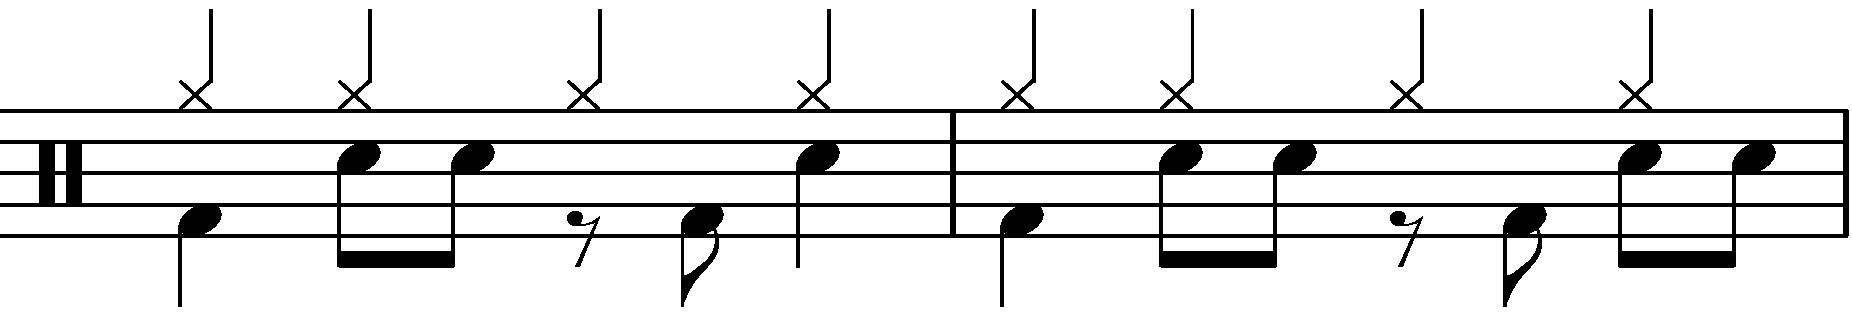 Additional 2 Bar Grooves - 8